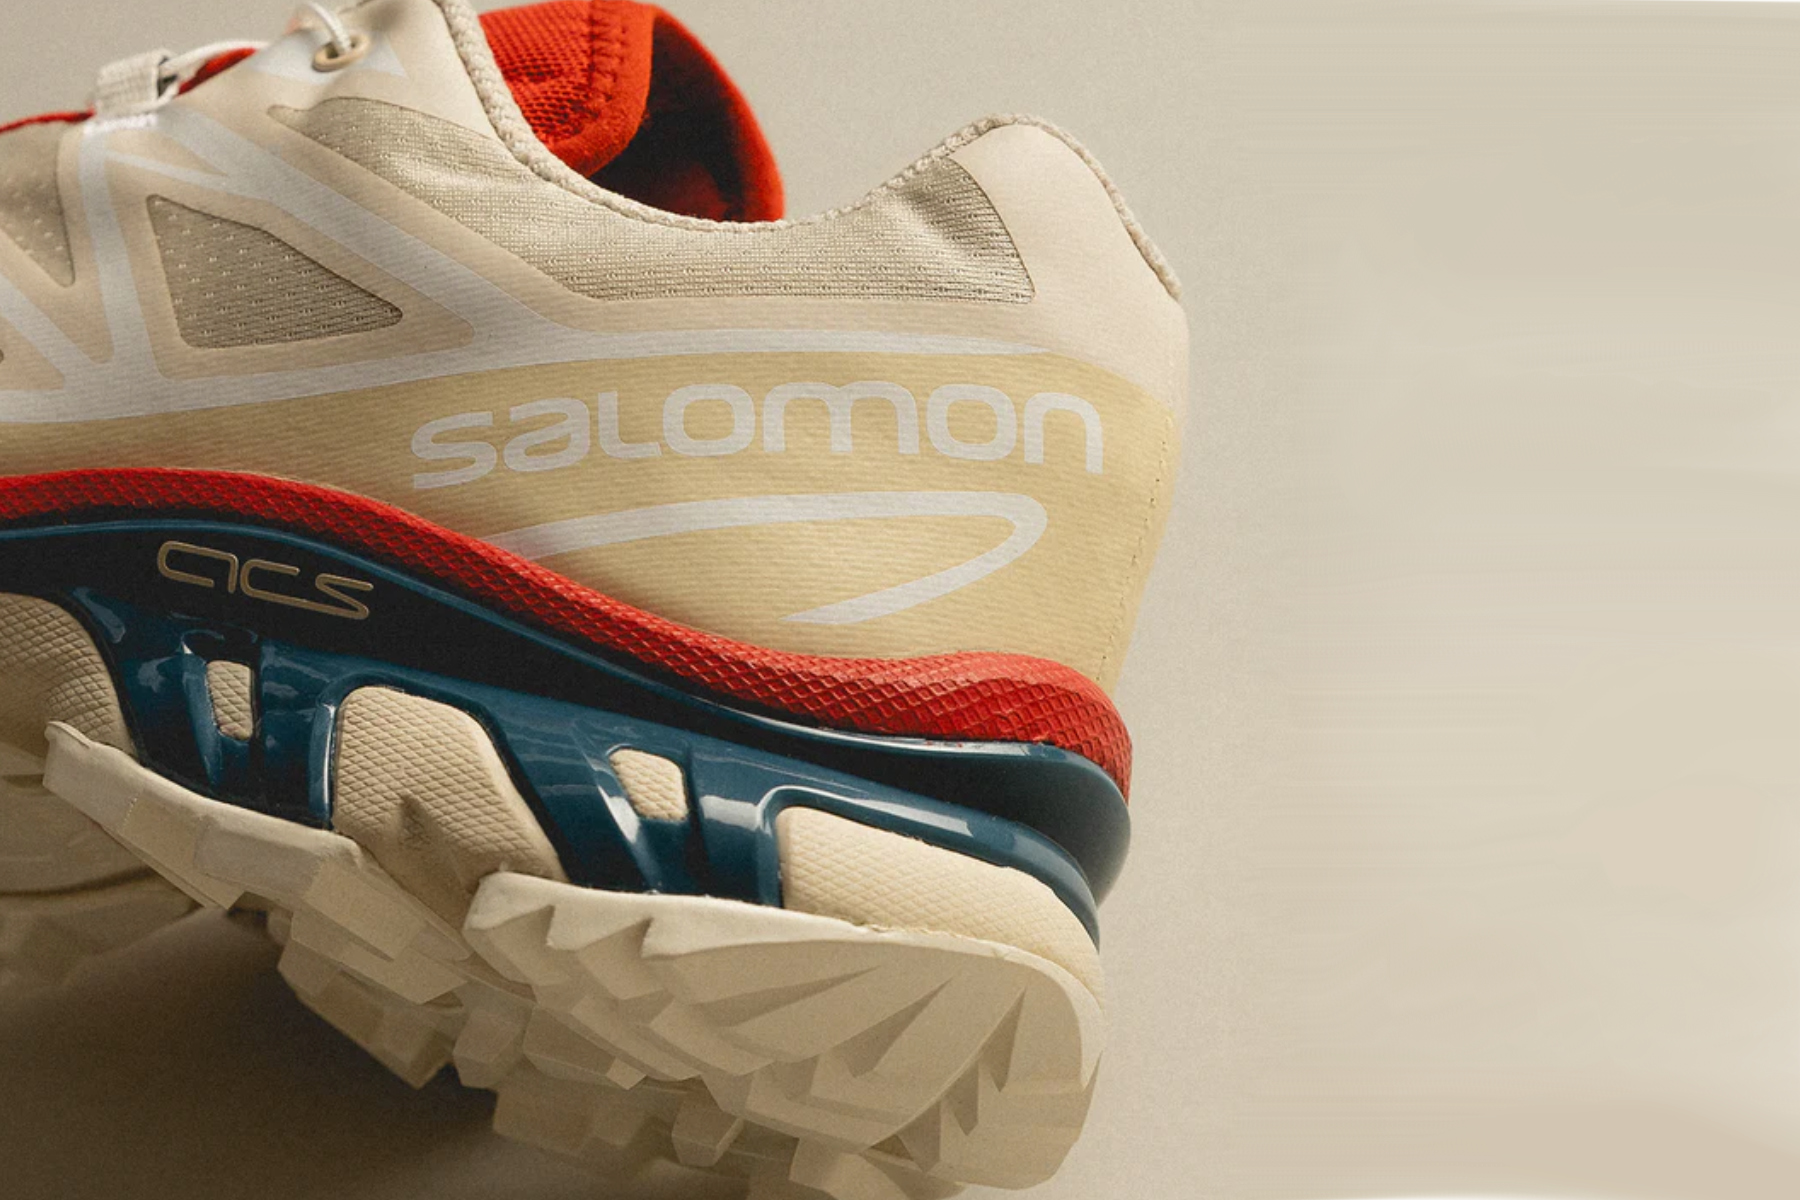 Salomon's most popular freestyle boots, the Launch Lace Team and the Ivy Boa color matching Salomon Sportstyle XT-6 for a FW23 Limited Collection.